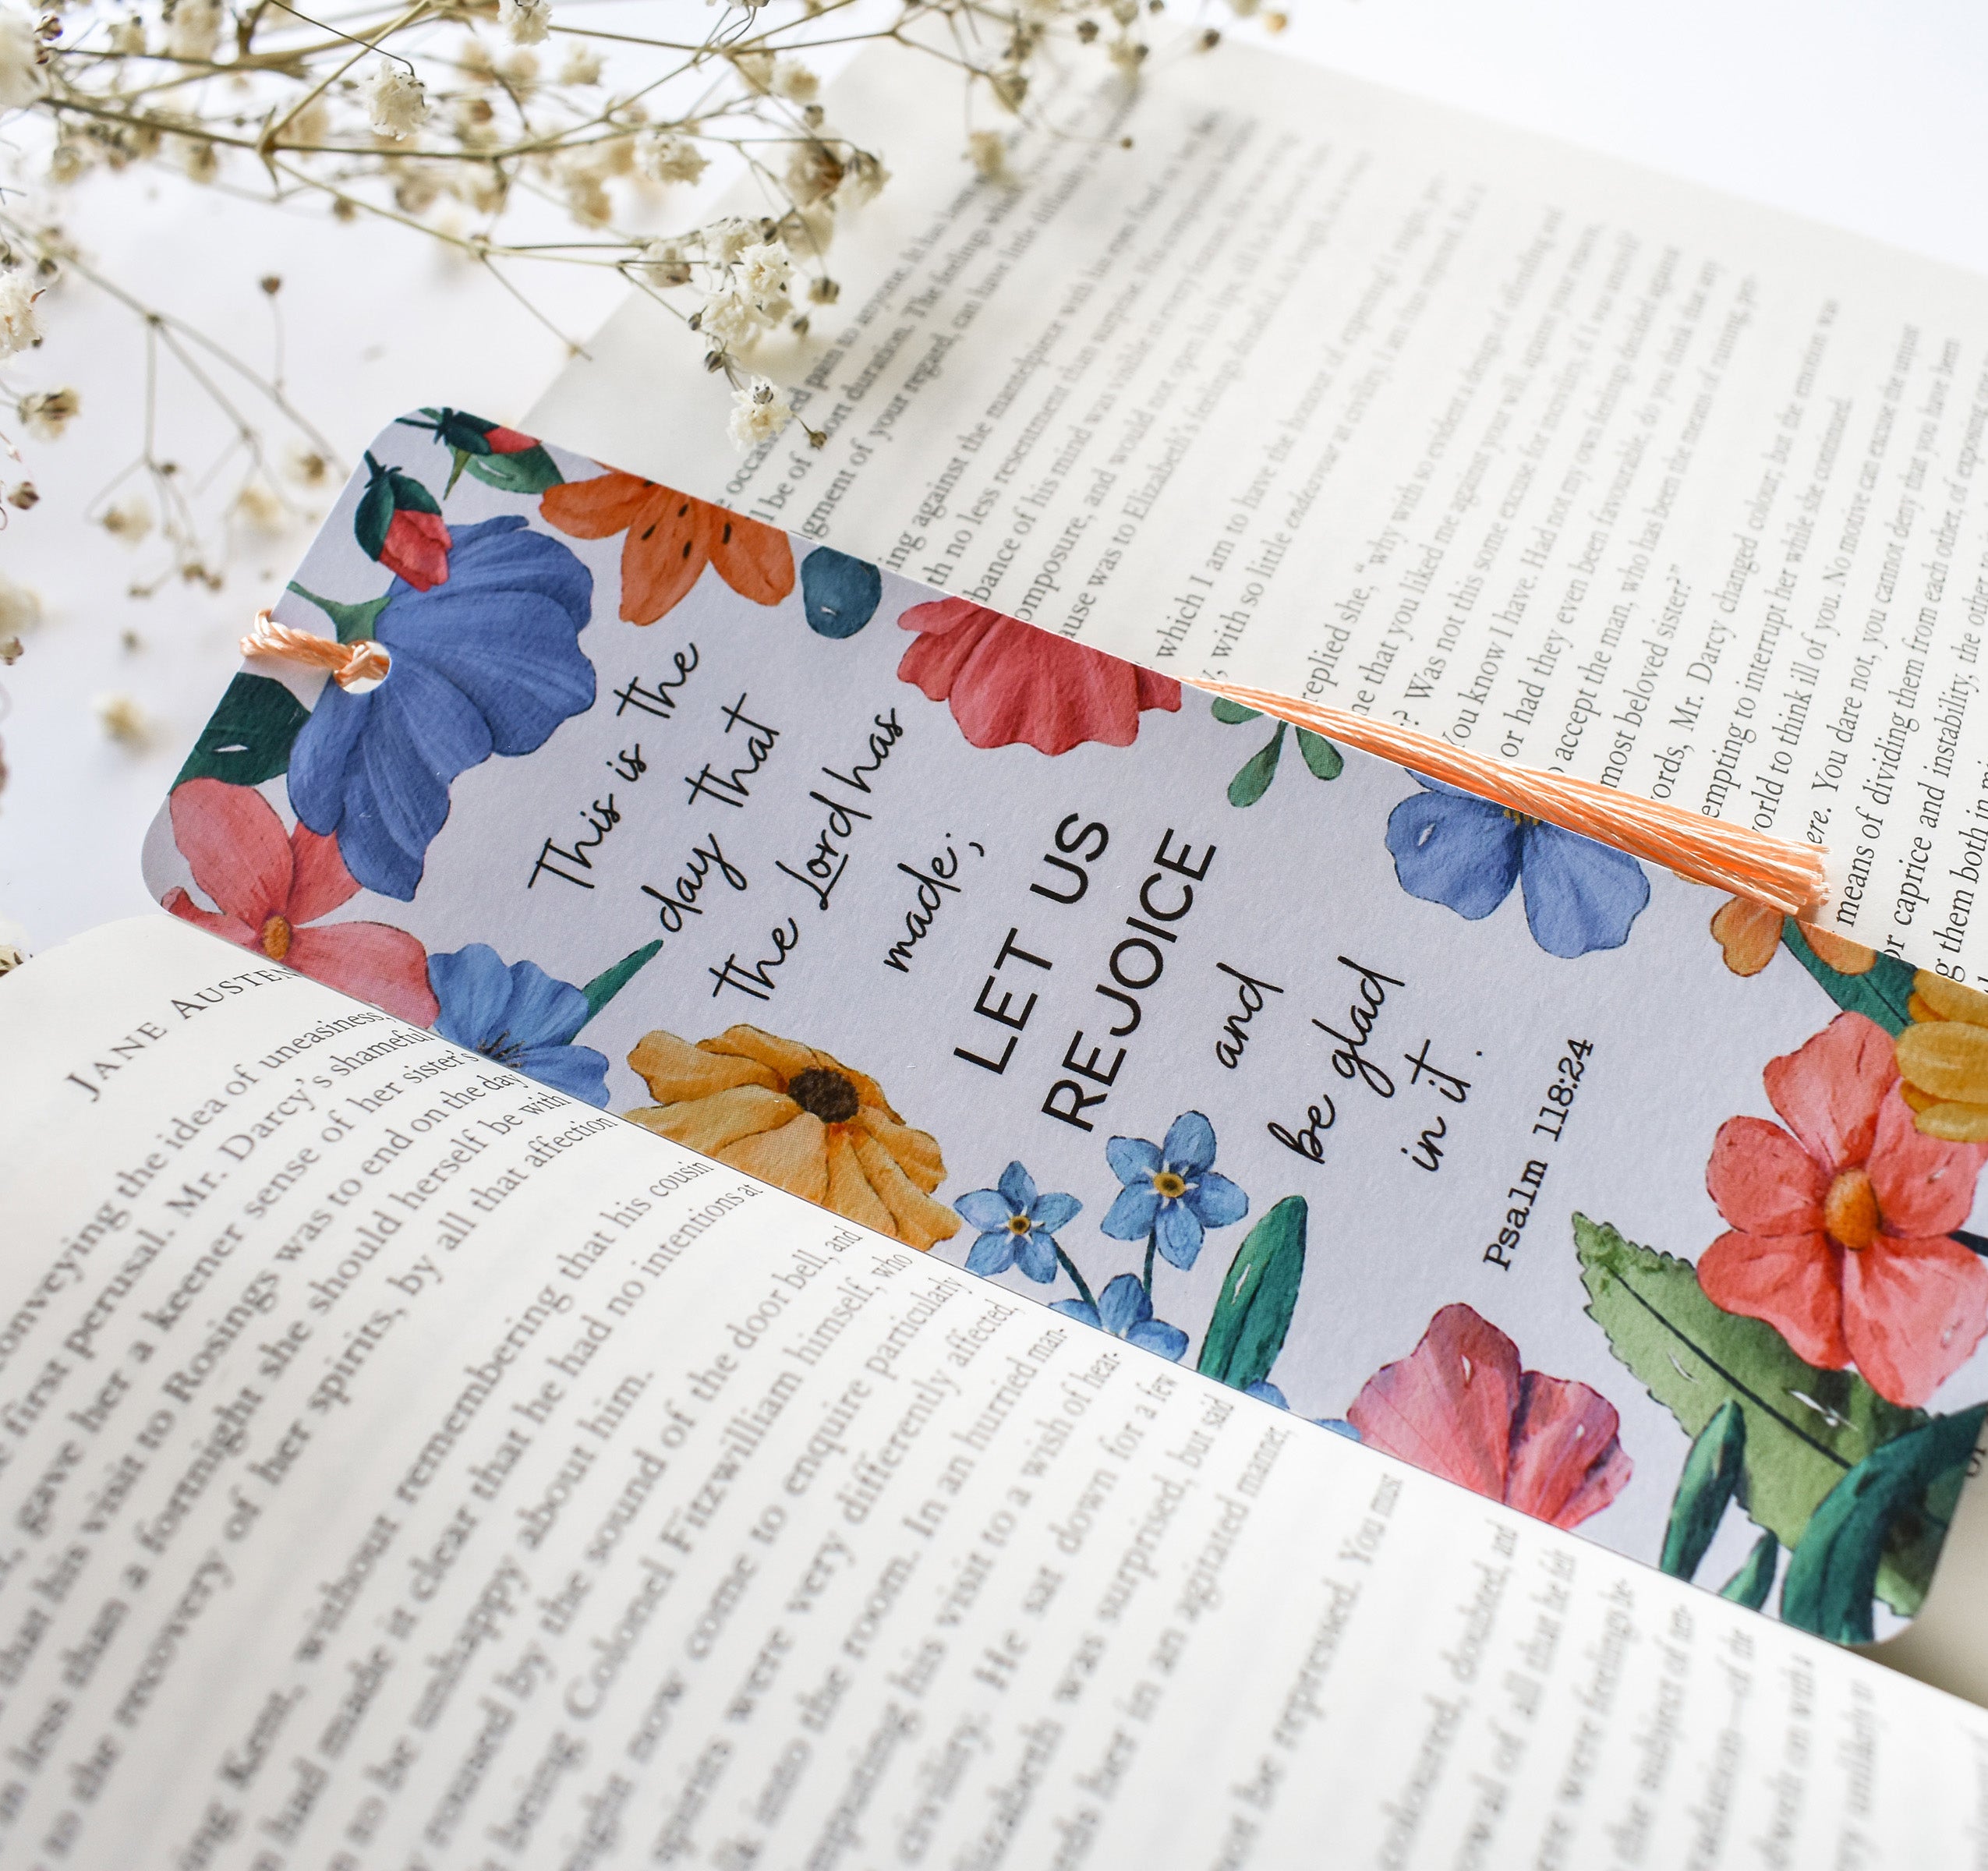 Books of The Bible Bookmarks - Stationery - 24 Pieces